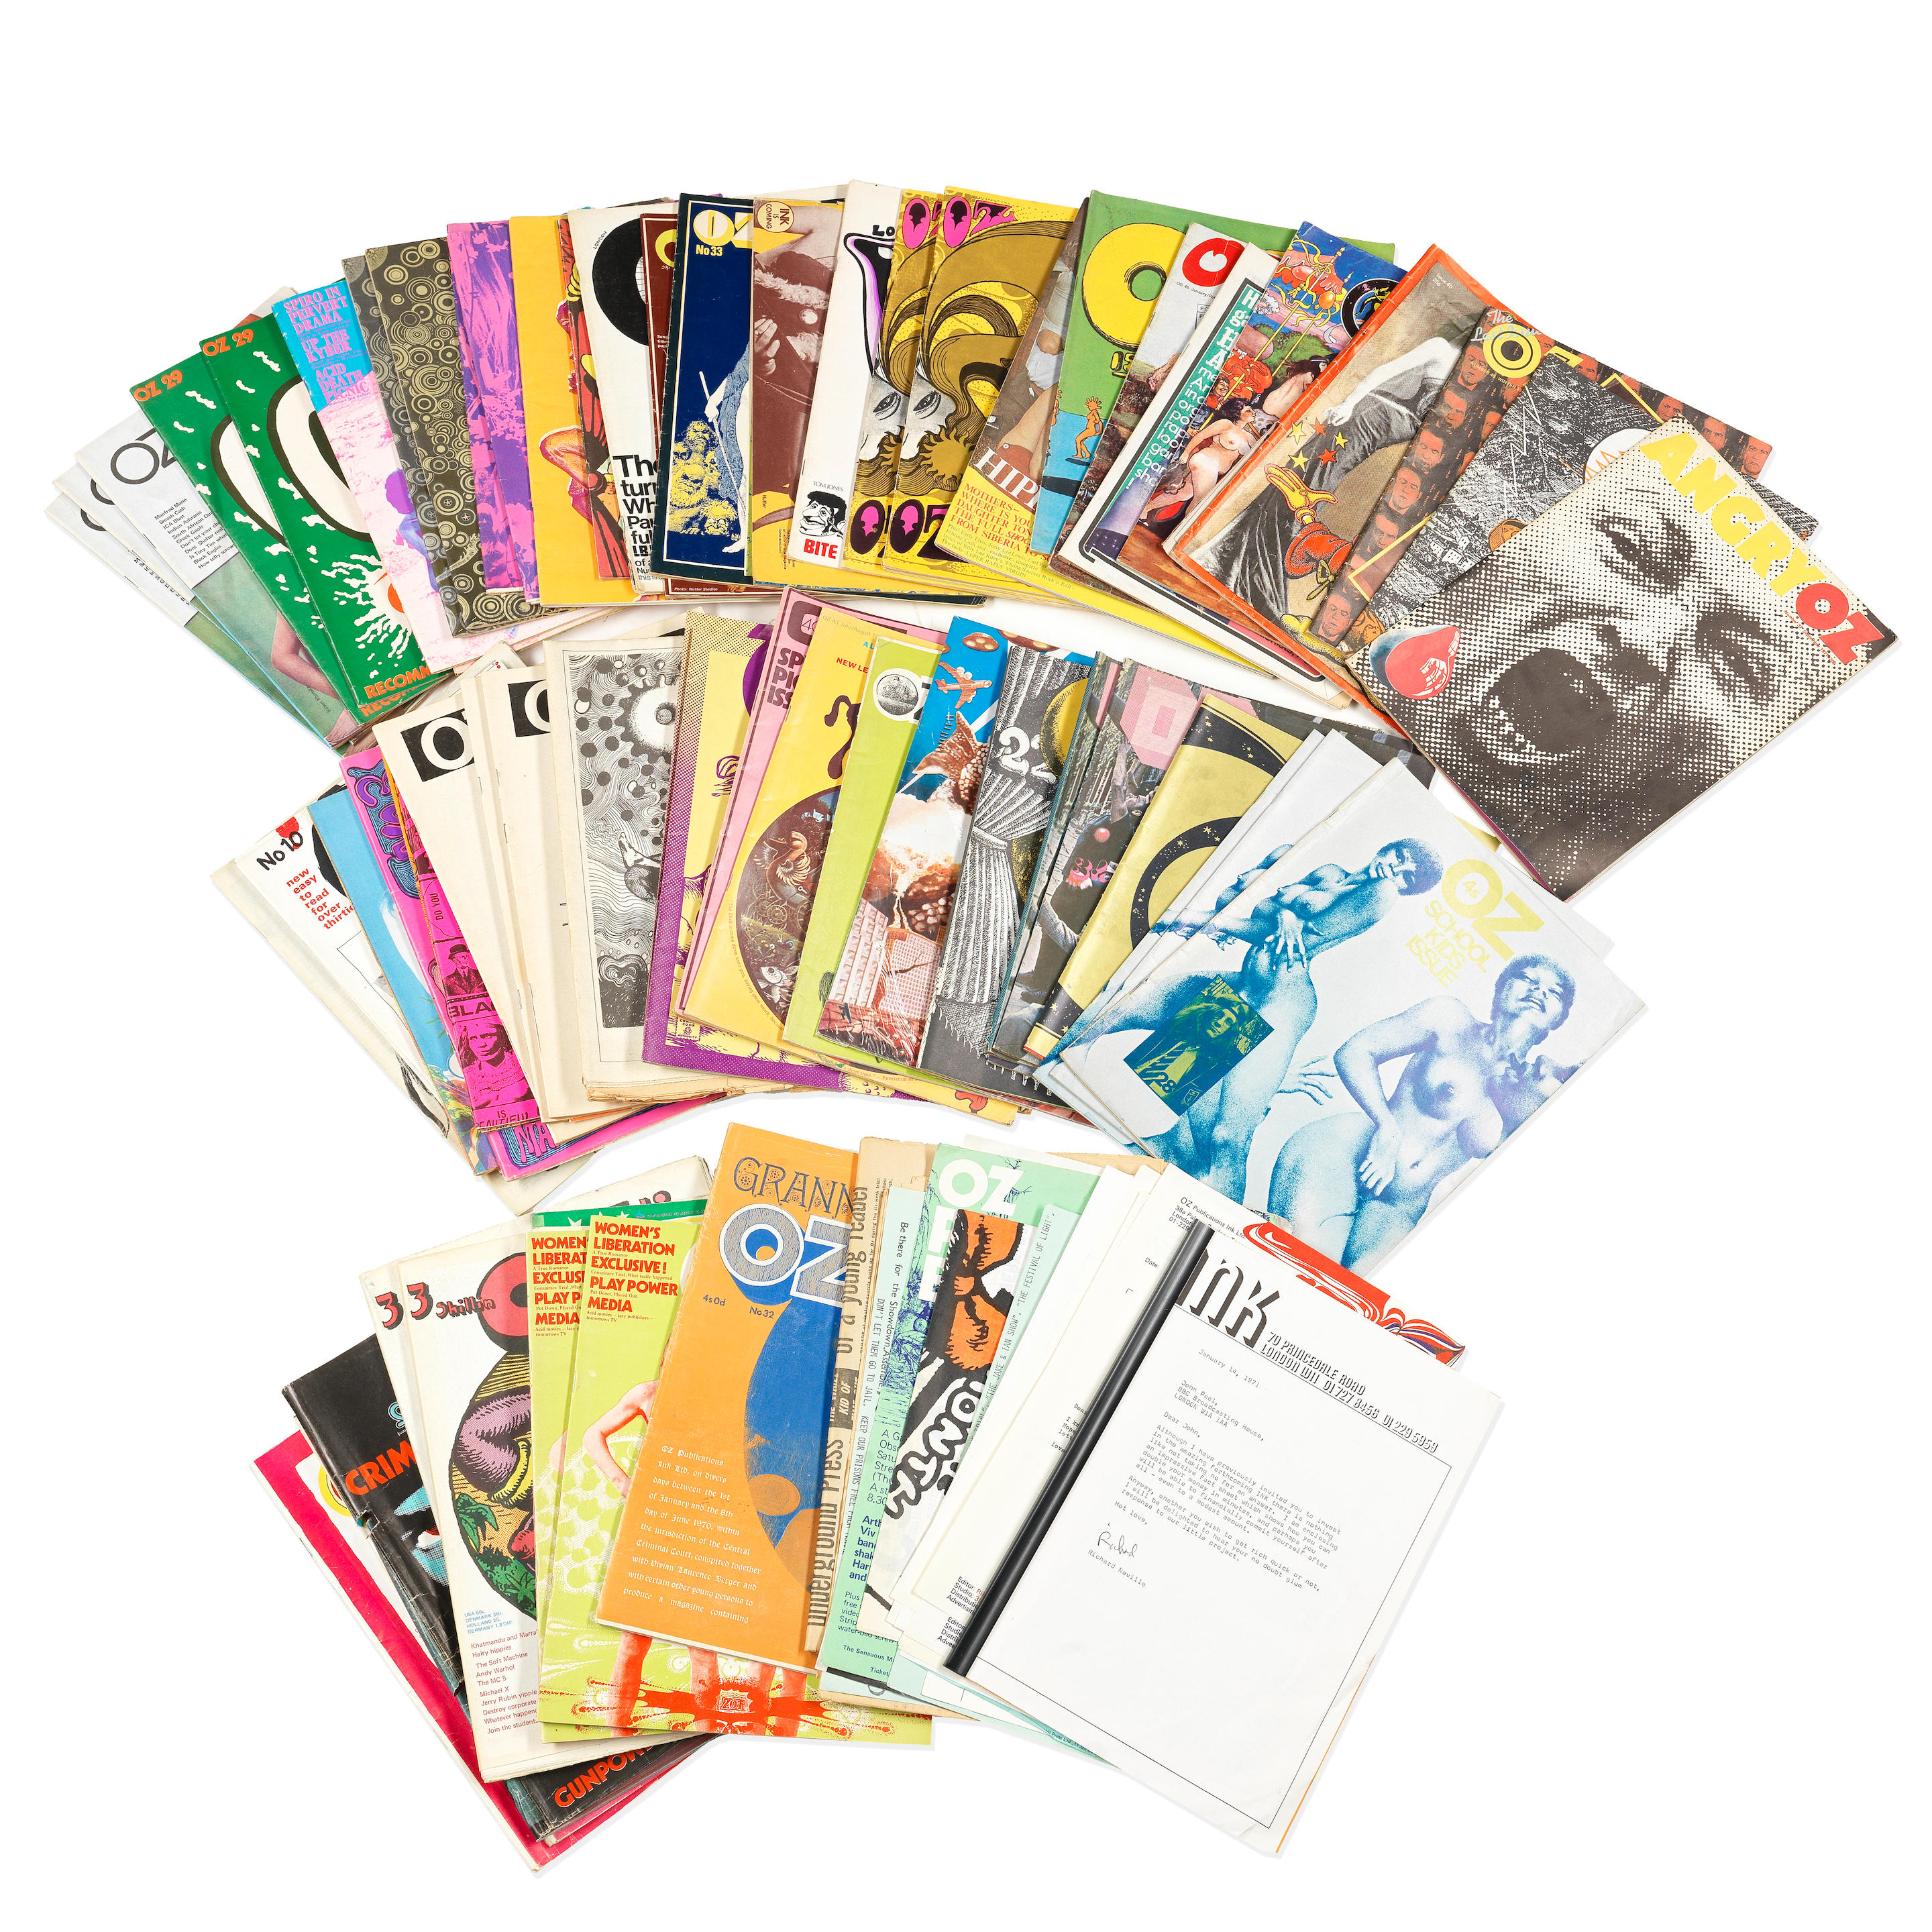 OZ Magazine: A Large Collection Of Magazines And Letters,